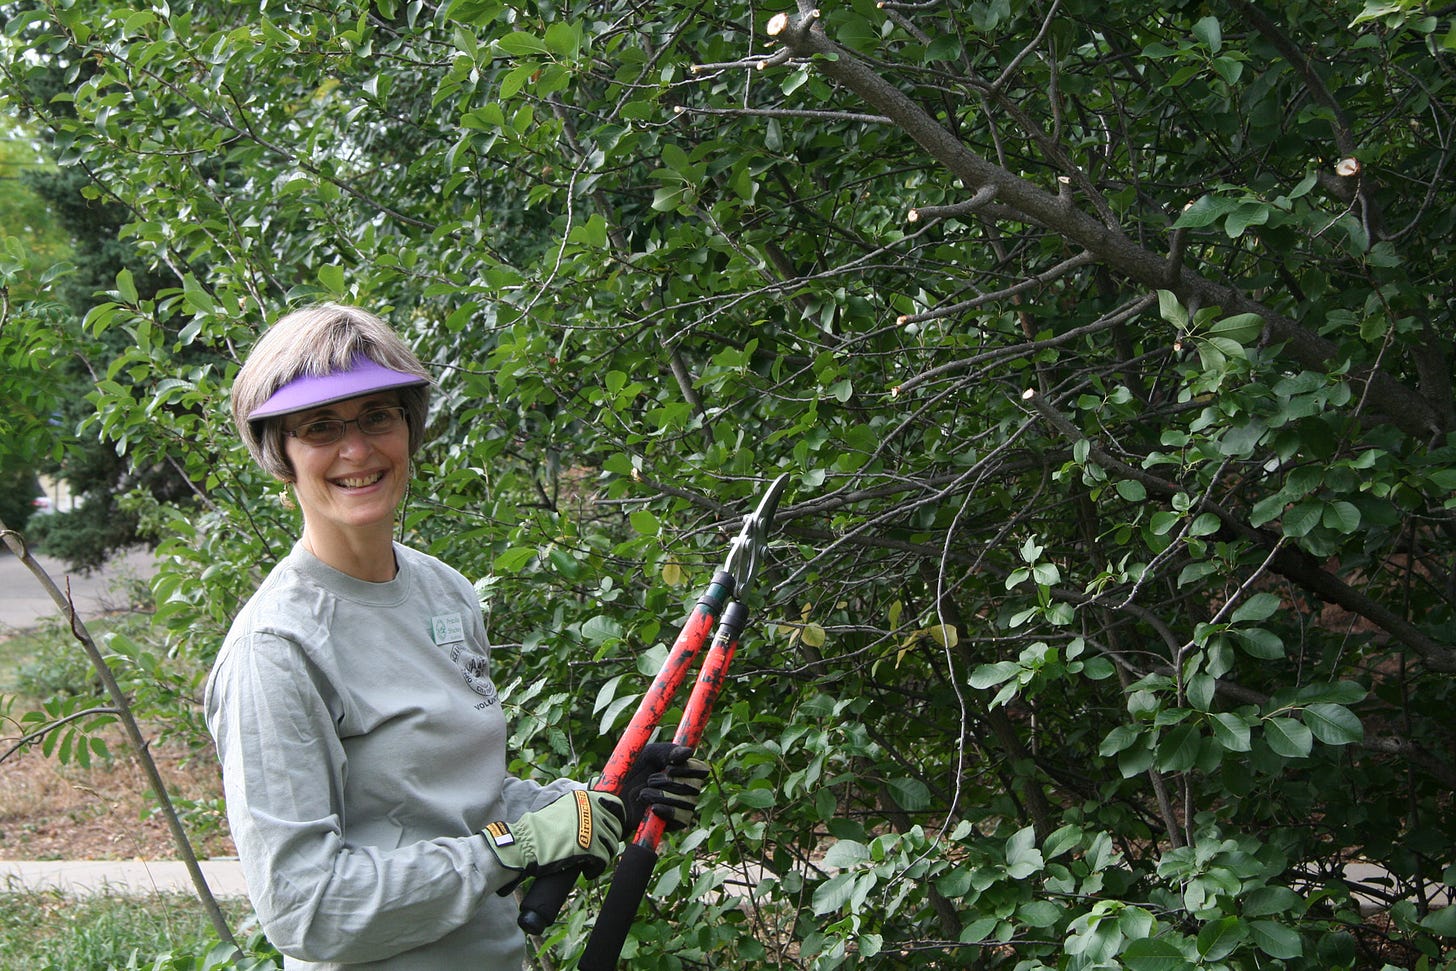 Woman in sage green T-shirt and name badge and garden gloves holding a pruner in front of ten-foot-tall wall of chokecherry greenery